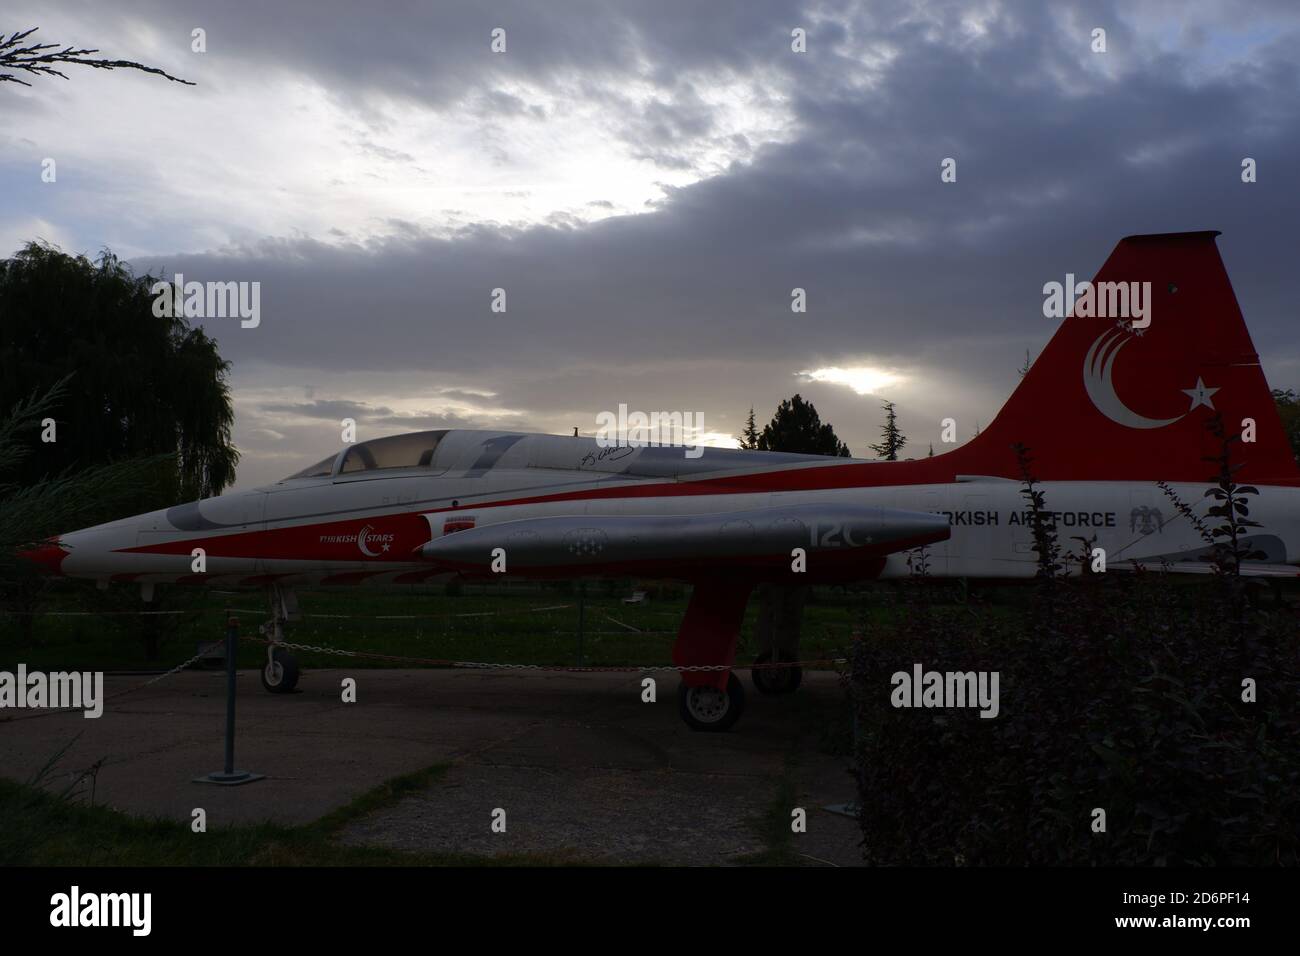 Plane of Turkish Air Force Air Acrobacy Team Stock Photo